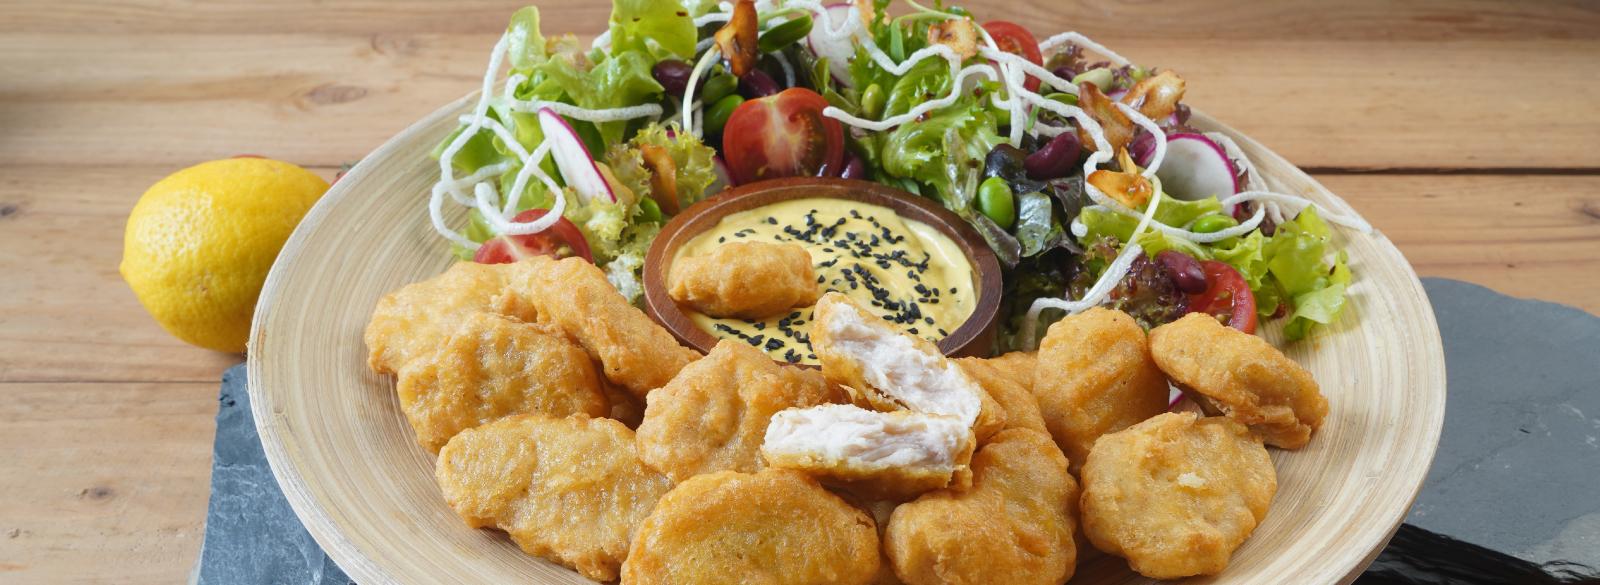 Chicken Nuggets with Asian Garden Salad and Black Sesame Miso Dip​